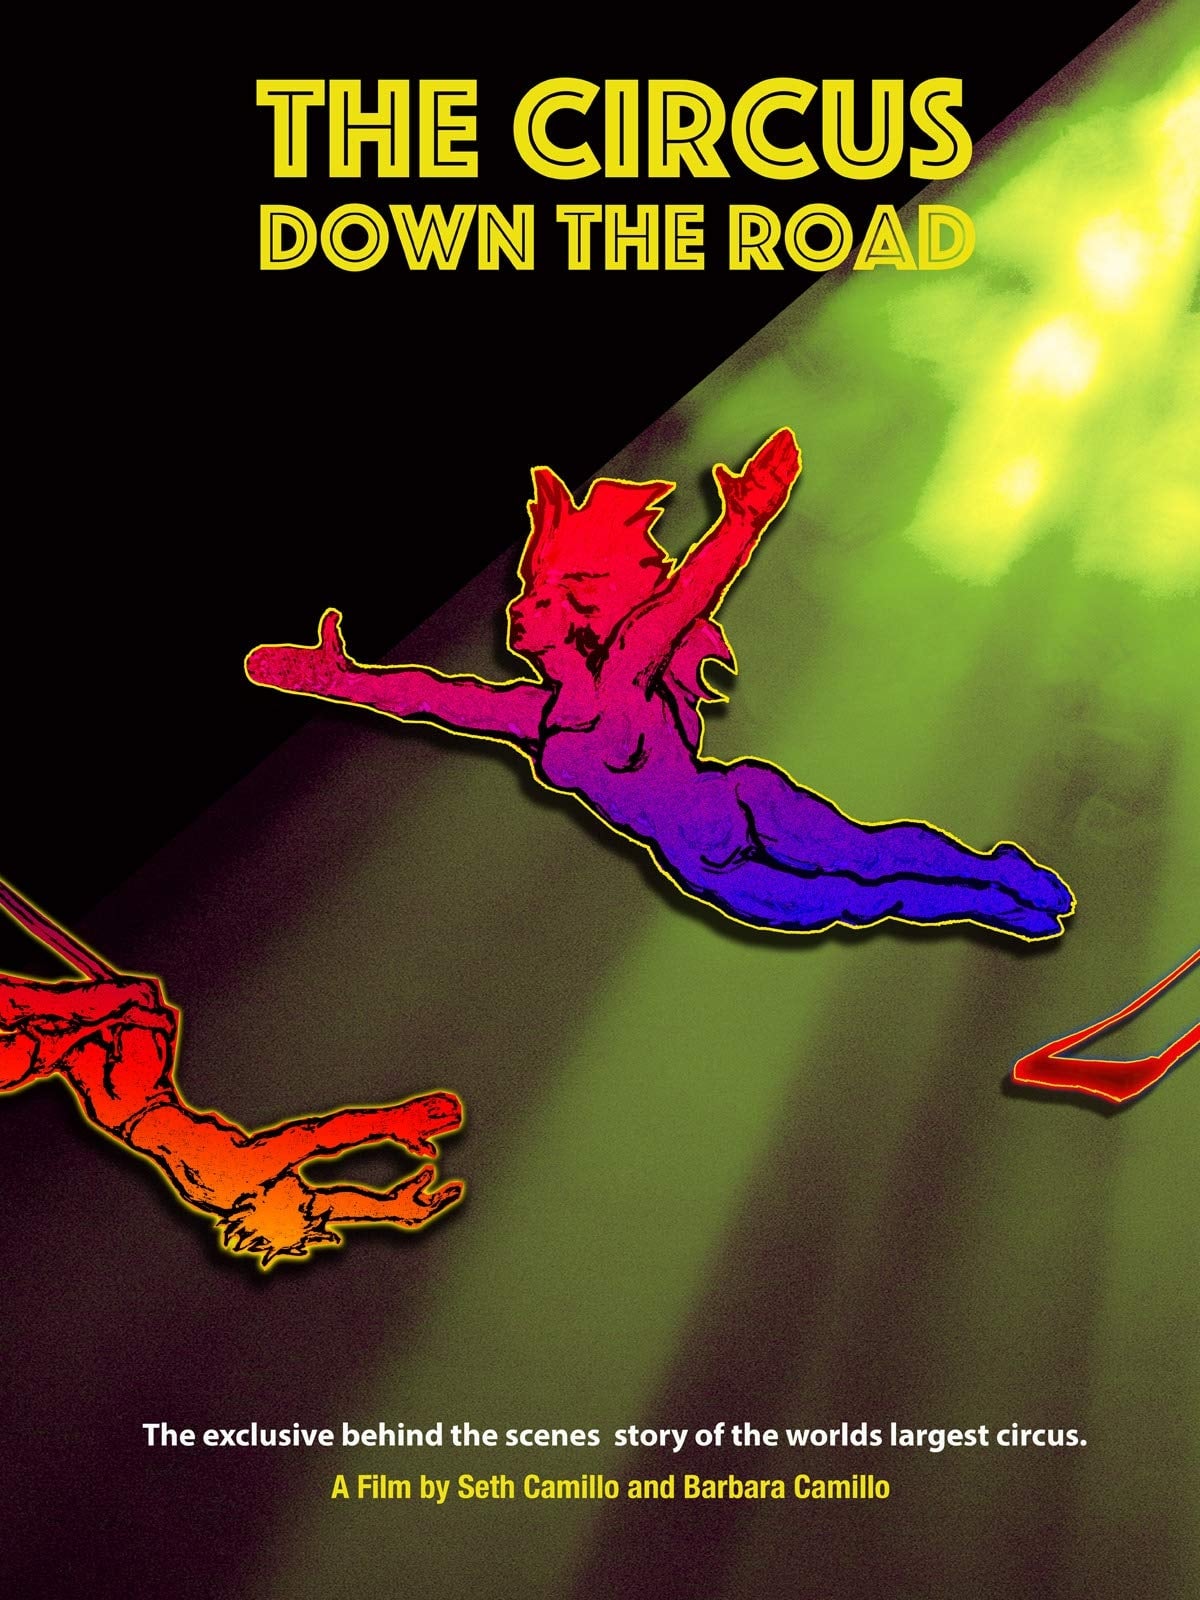 The Circus: Down the Road